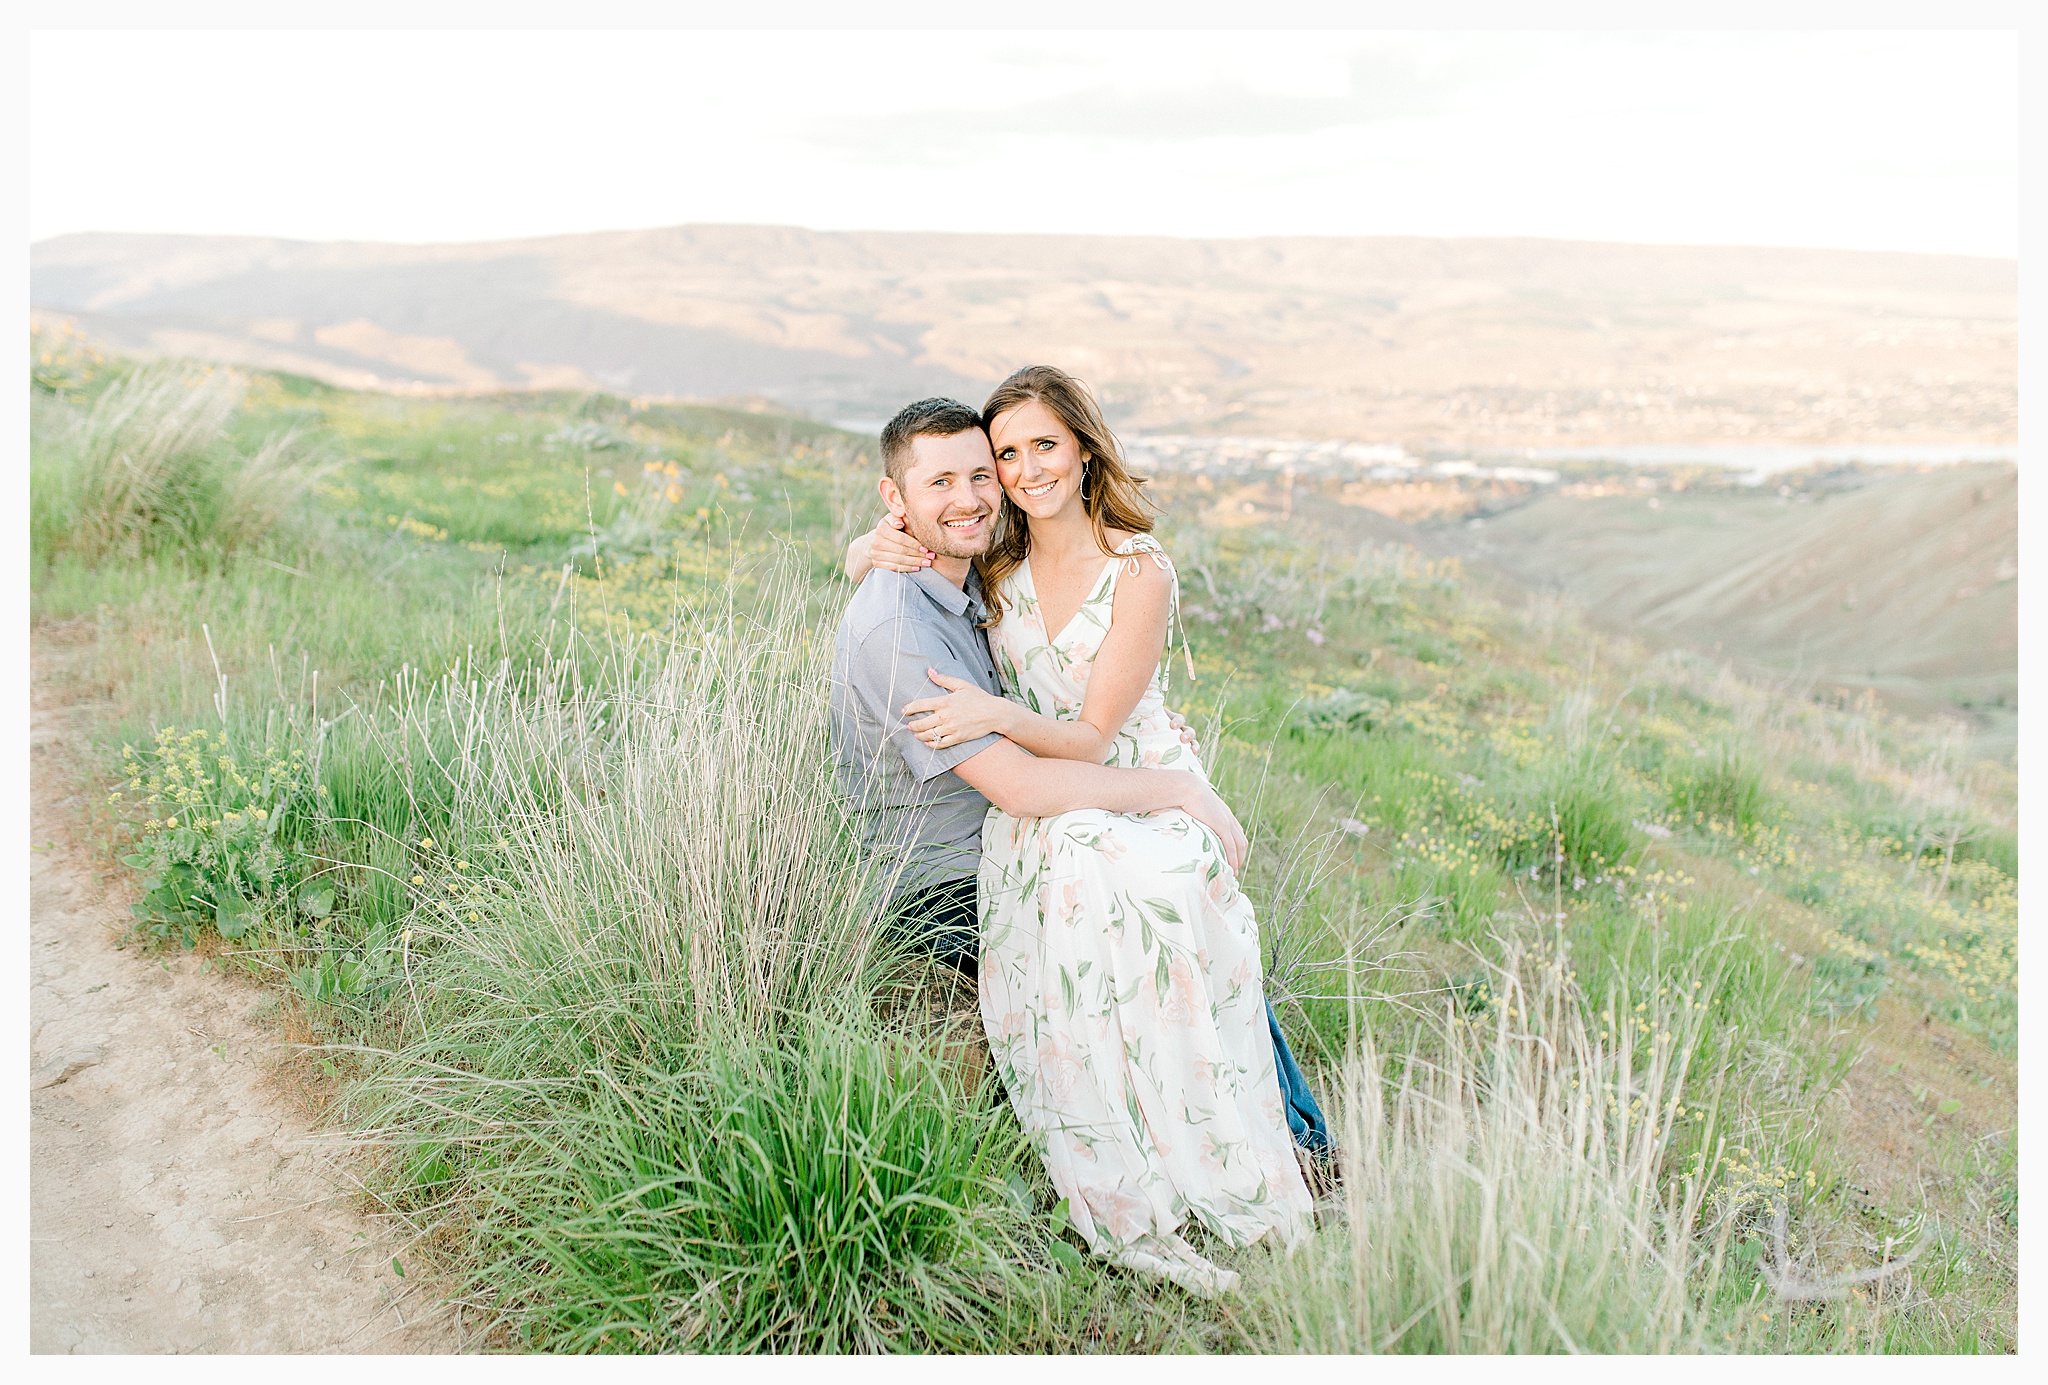 Engagement session amongst the wildflowers in Wenatchee, Washington | Engagement Session Outfit Inspiration for Wedding Photography with Emma Rose Company | Light and Airy PNW Photographer, Seattle Bride_0018.jpg